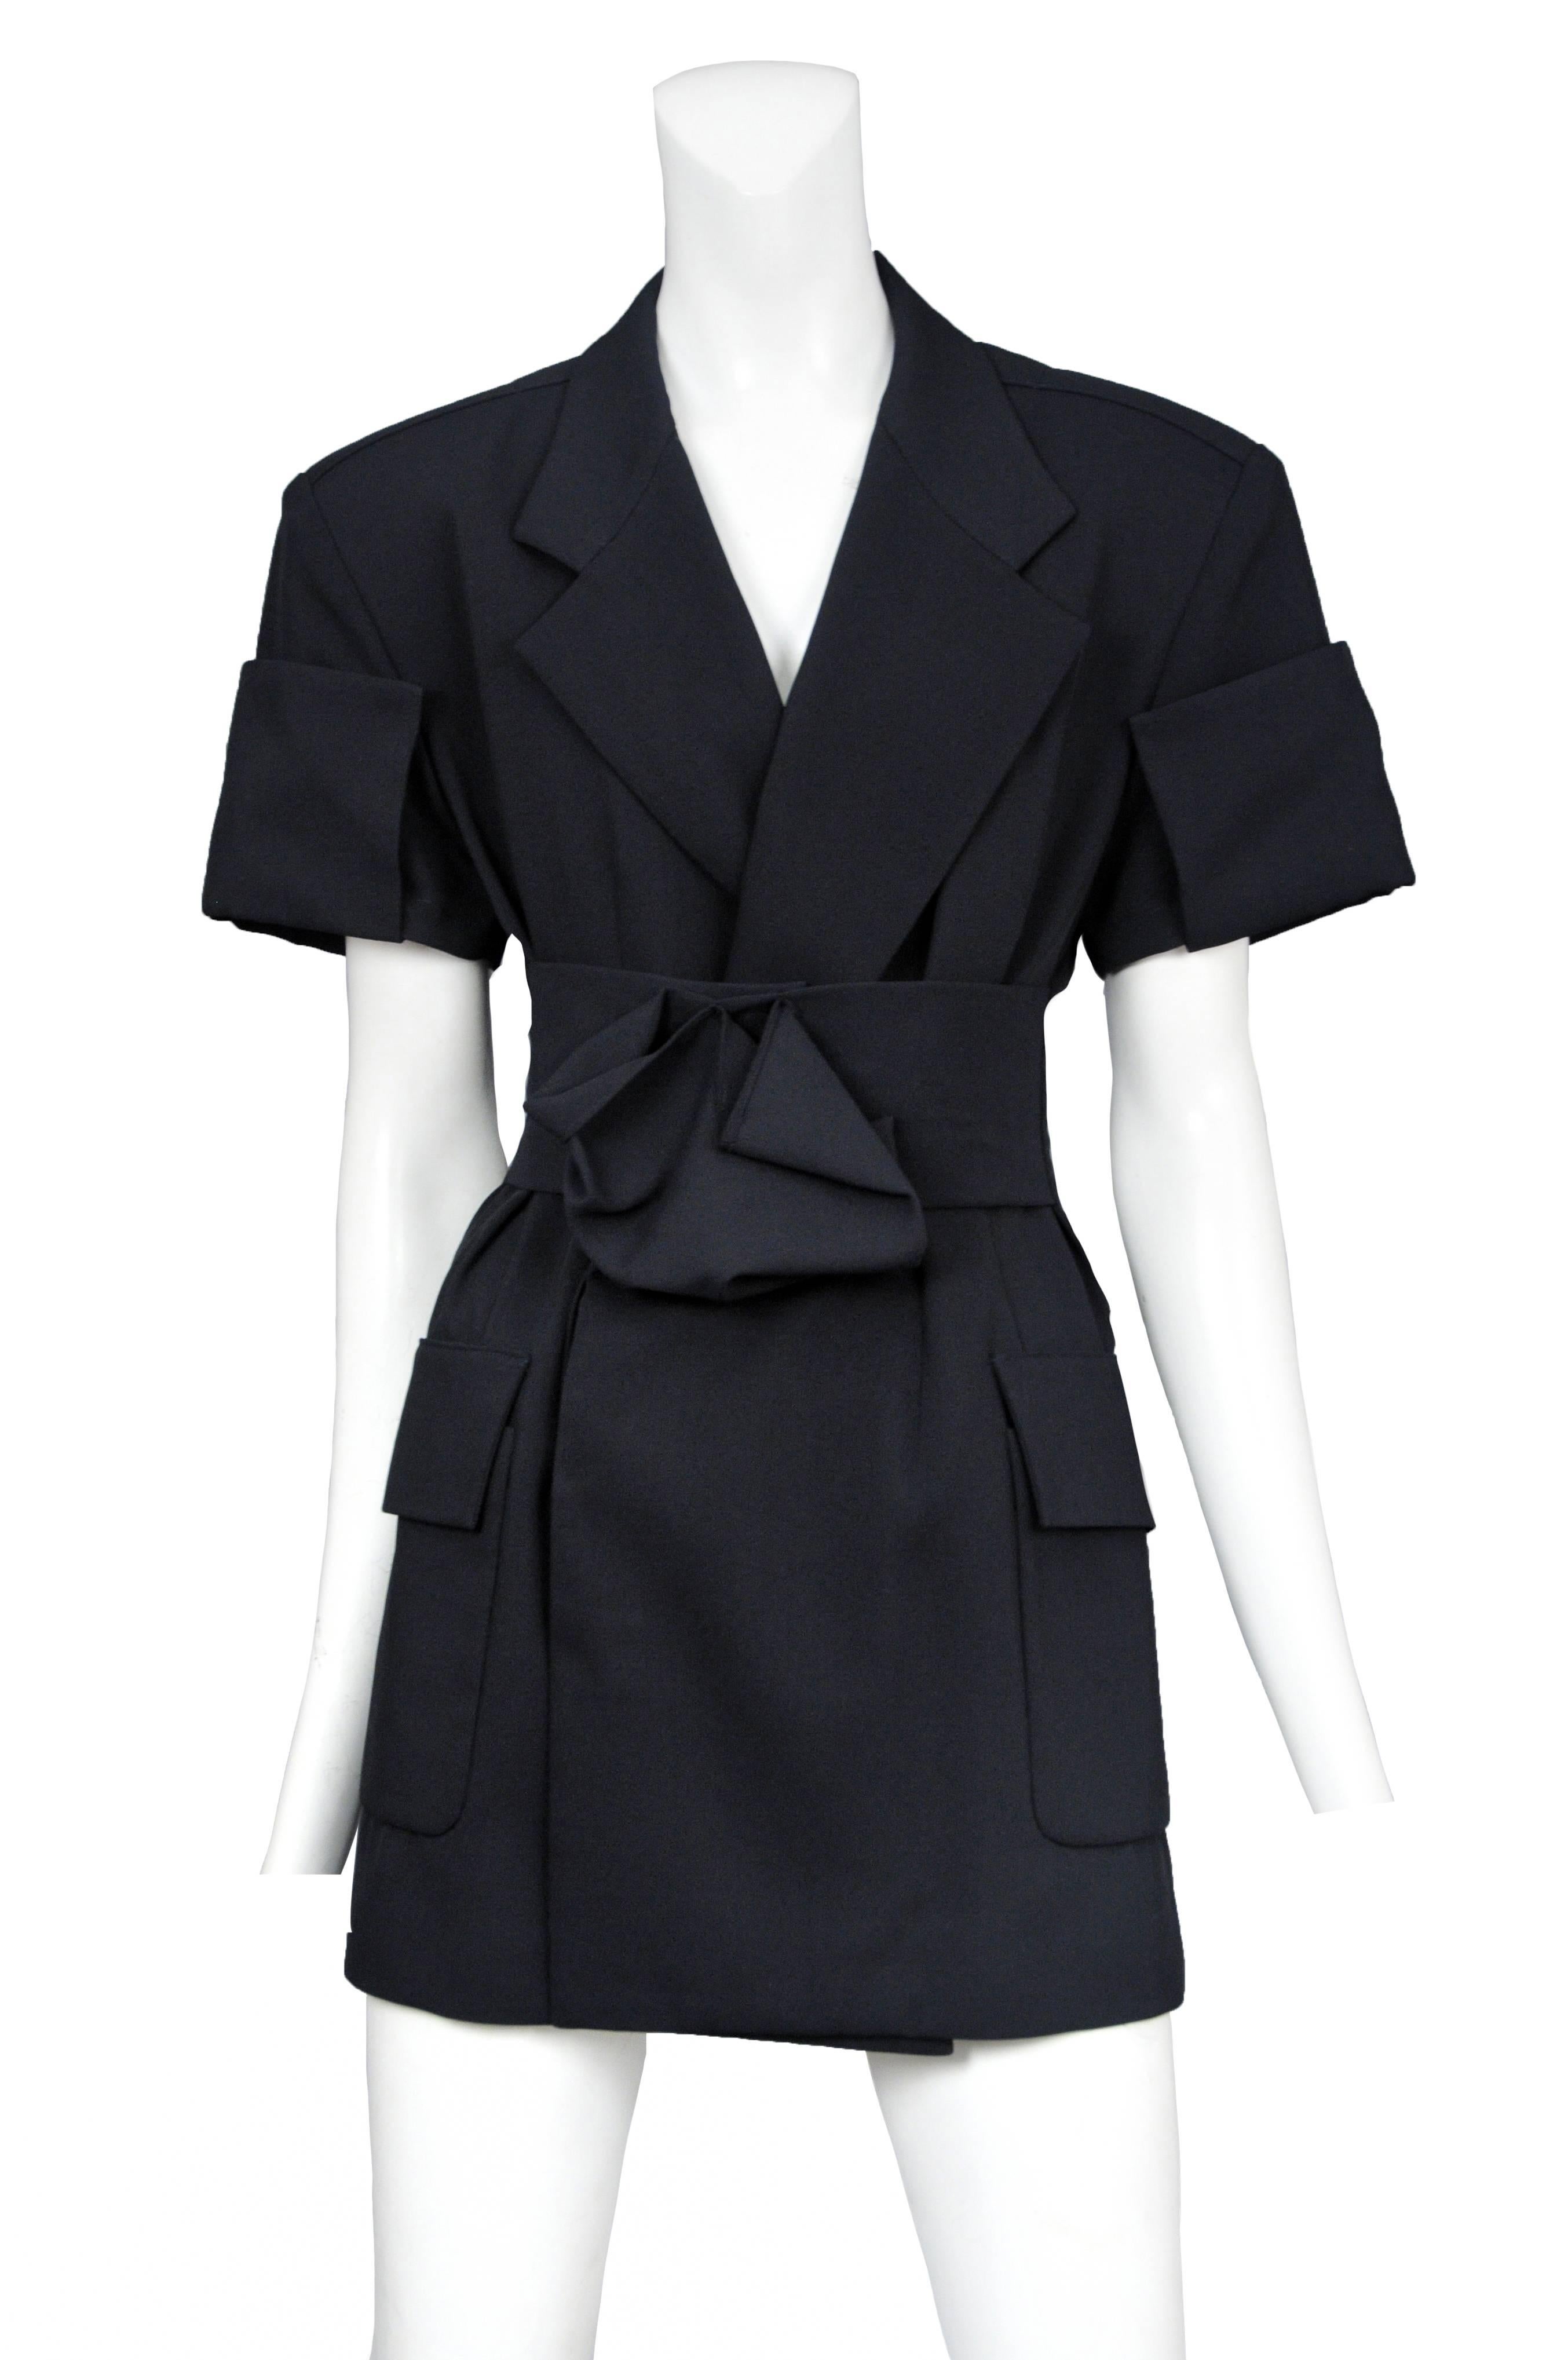 Vintage Yohji Yamamoto navy short sleeve overlapping blazer tunic featuring a wide lapel, side pockets, matching waist belt at front, and origami style pleating at the cuffs and belt center.
Please inquire for additional images.